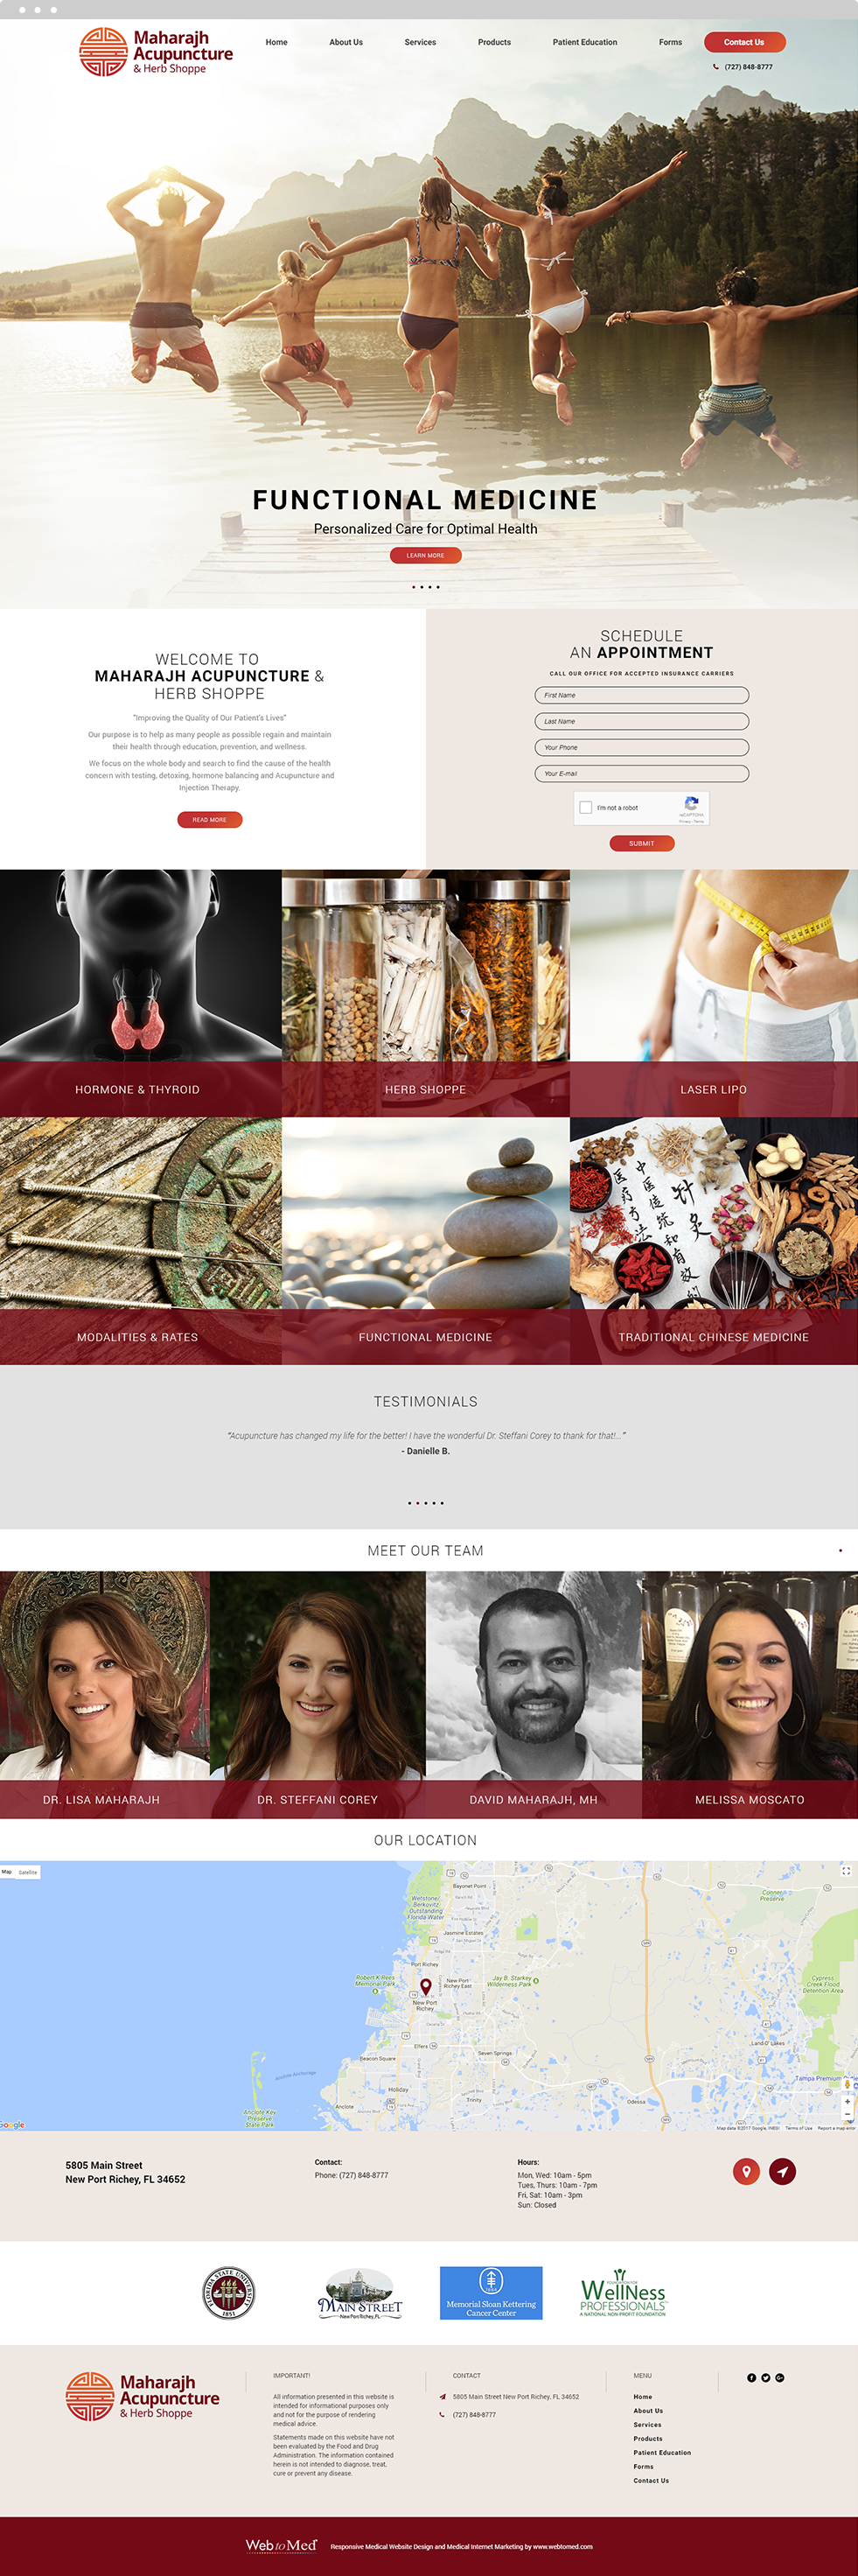 Acupuncture Website Design - Maharajh Acupuncture & Herb Shoppe - Homepage